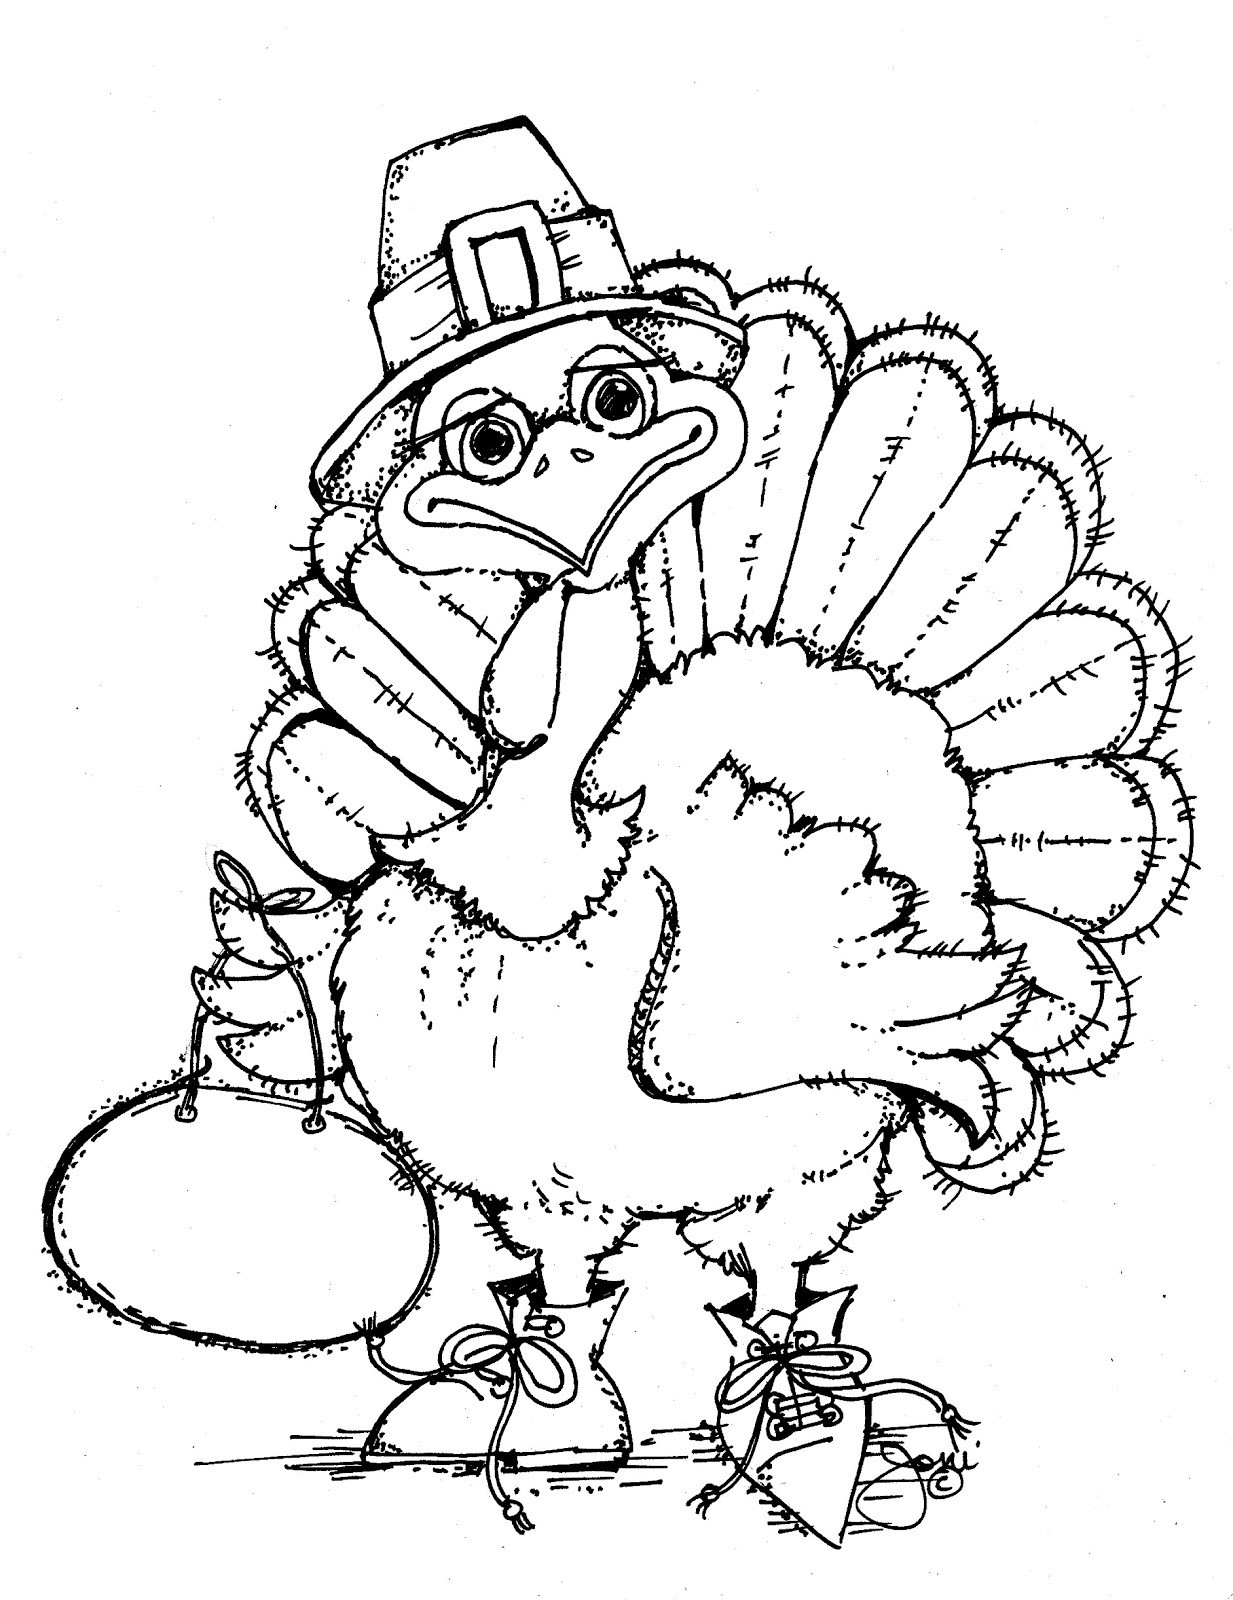 Thanksgiving Turkey Coloring Pages Printables
 Free Printable Turkey Coloring Pages For Kids